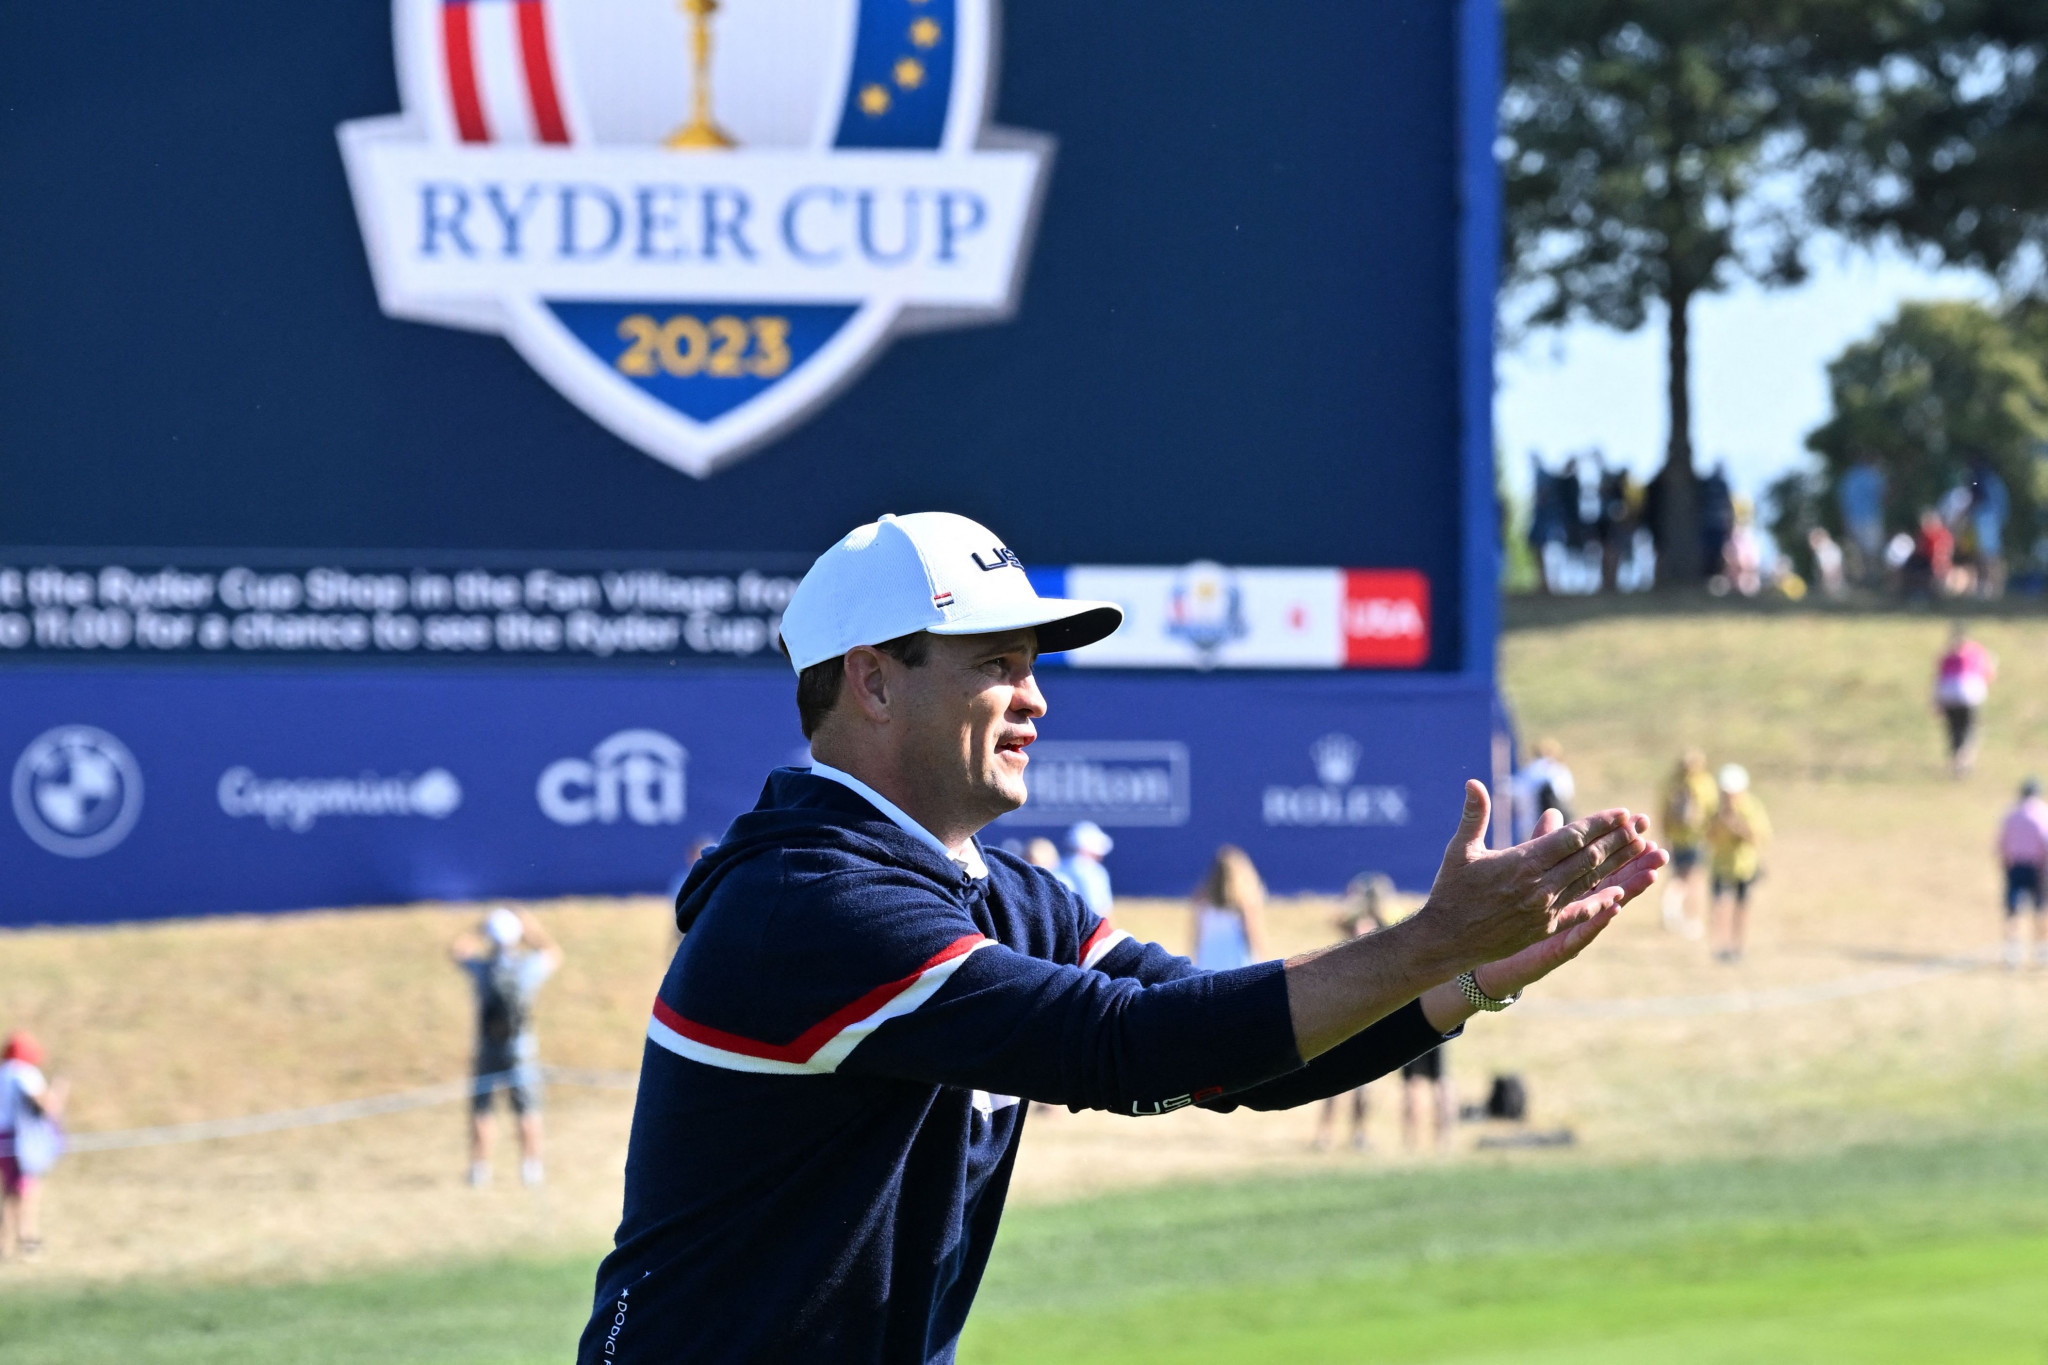 Zach Johnson will hope to guide the United States to a first Ryder Cup win in Europe in 30 years ©Getty Images